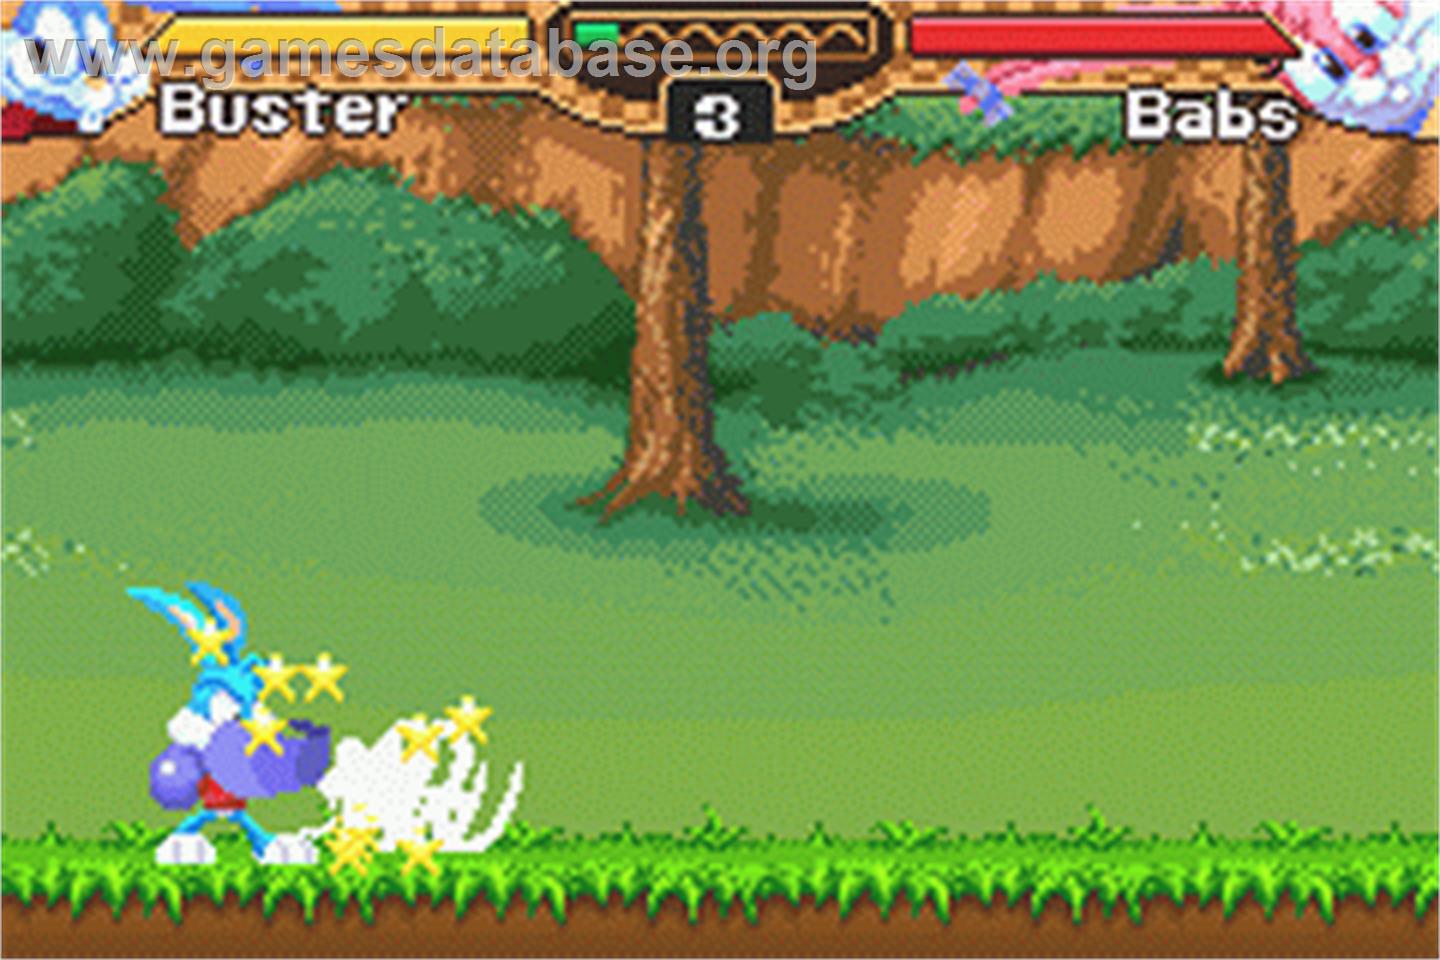 Tiny Toon Adventures: Buster's Bad Dream - Nintendo Game Boy Advance - Artwork - In Game